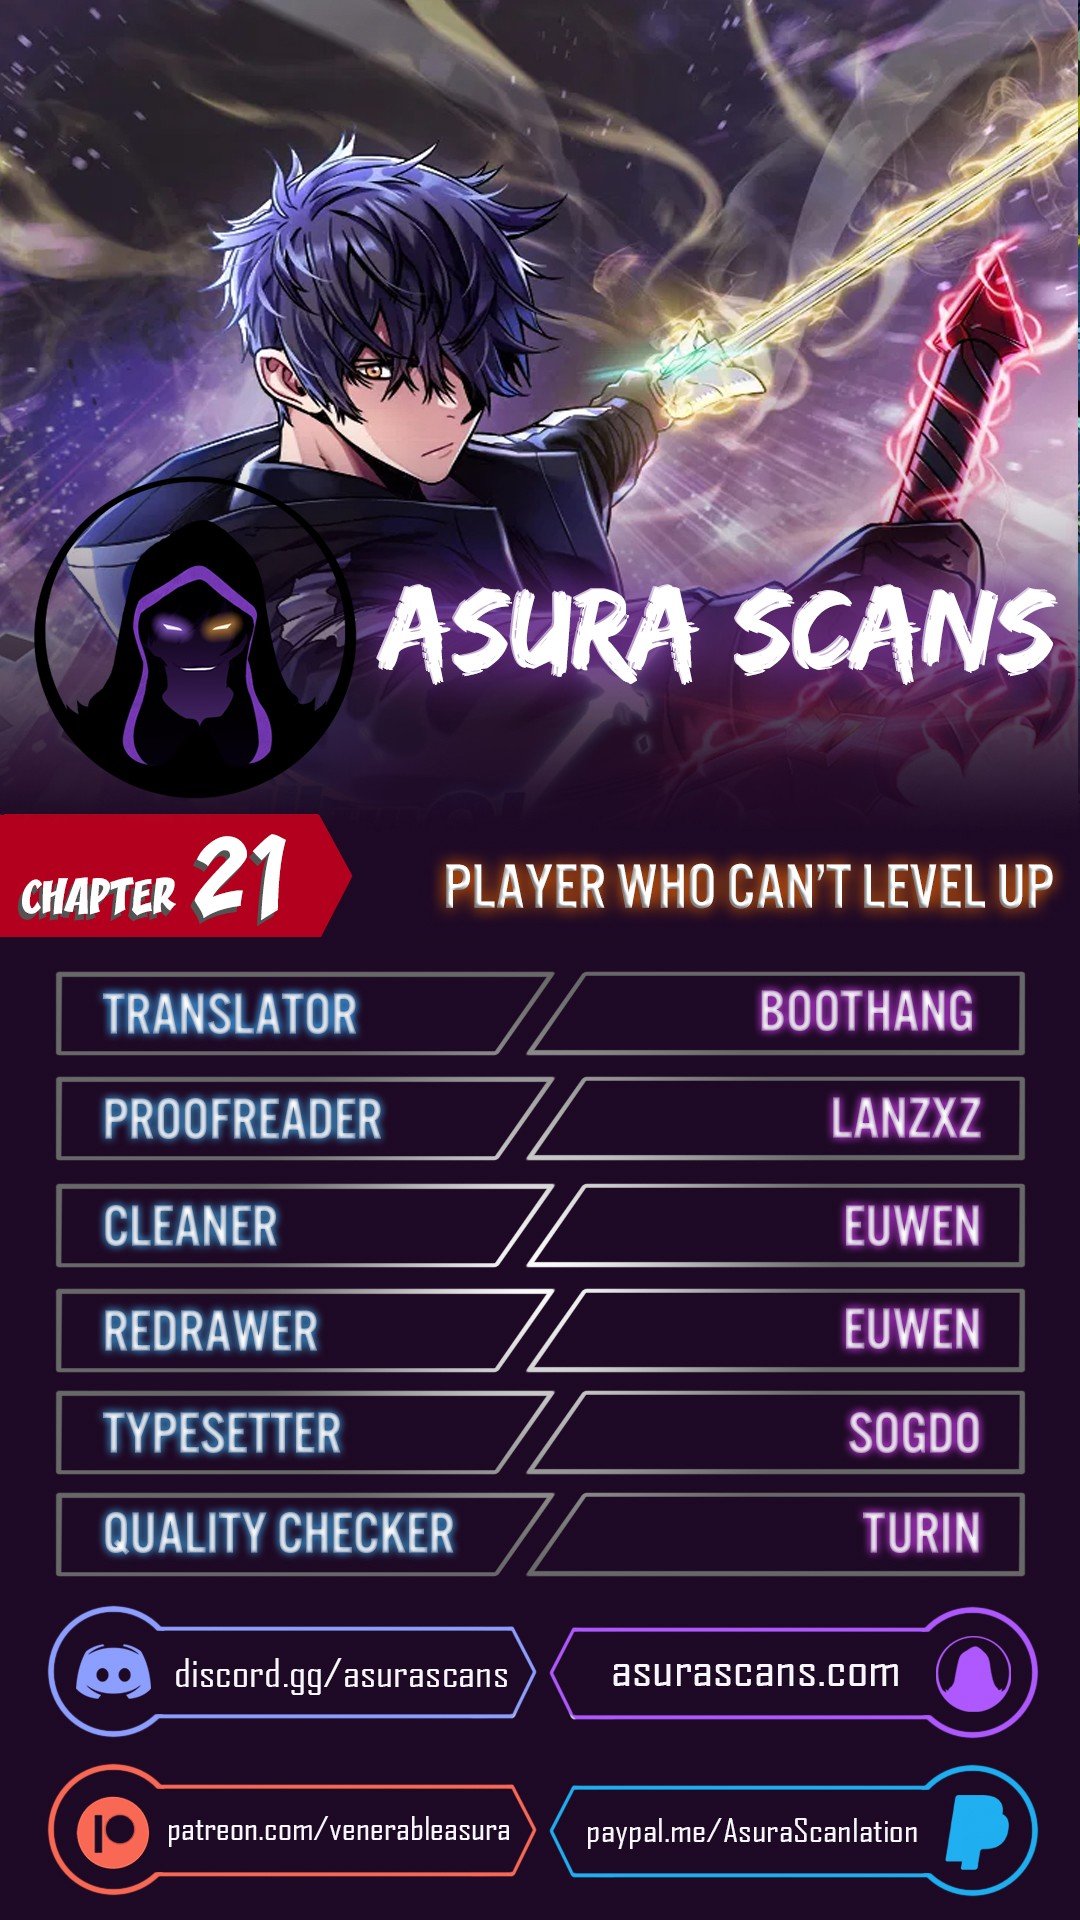 player-who-cant-level-up-chap-21-0